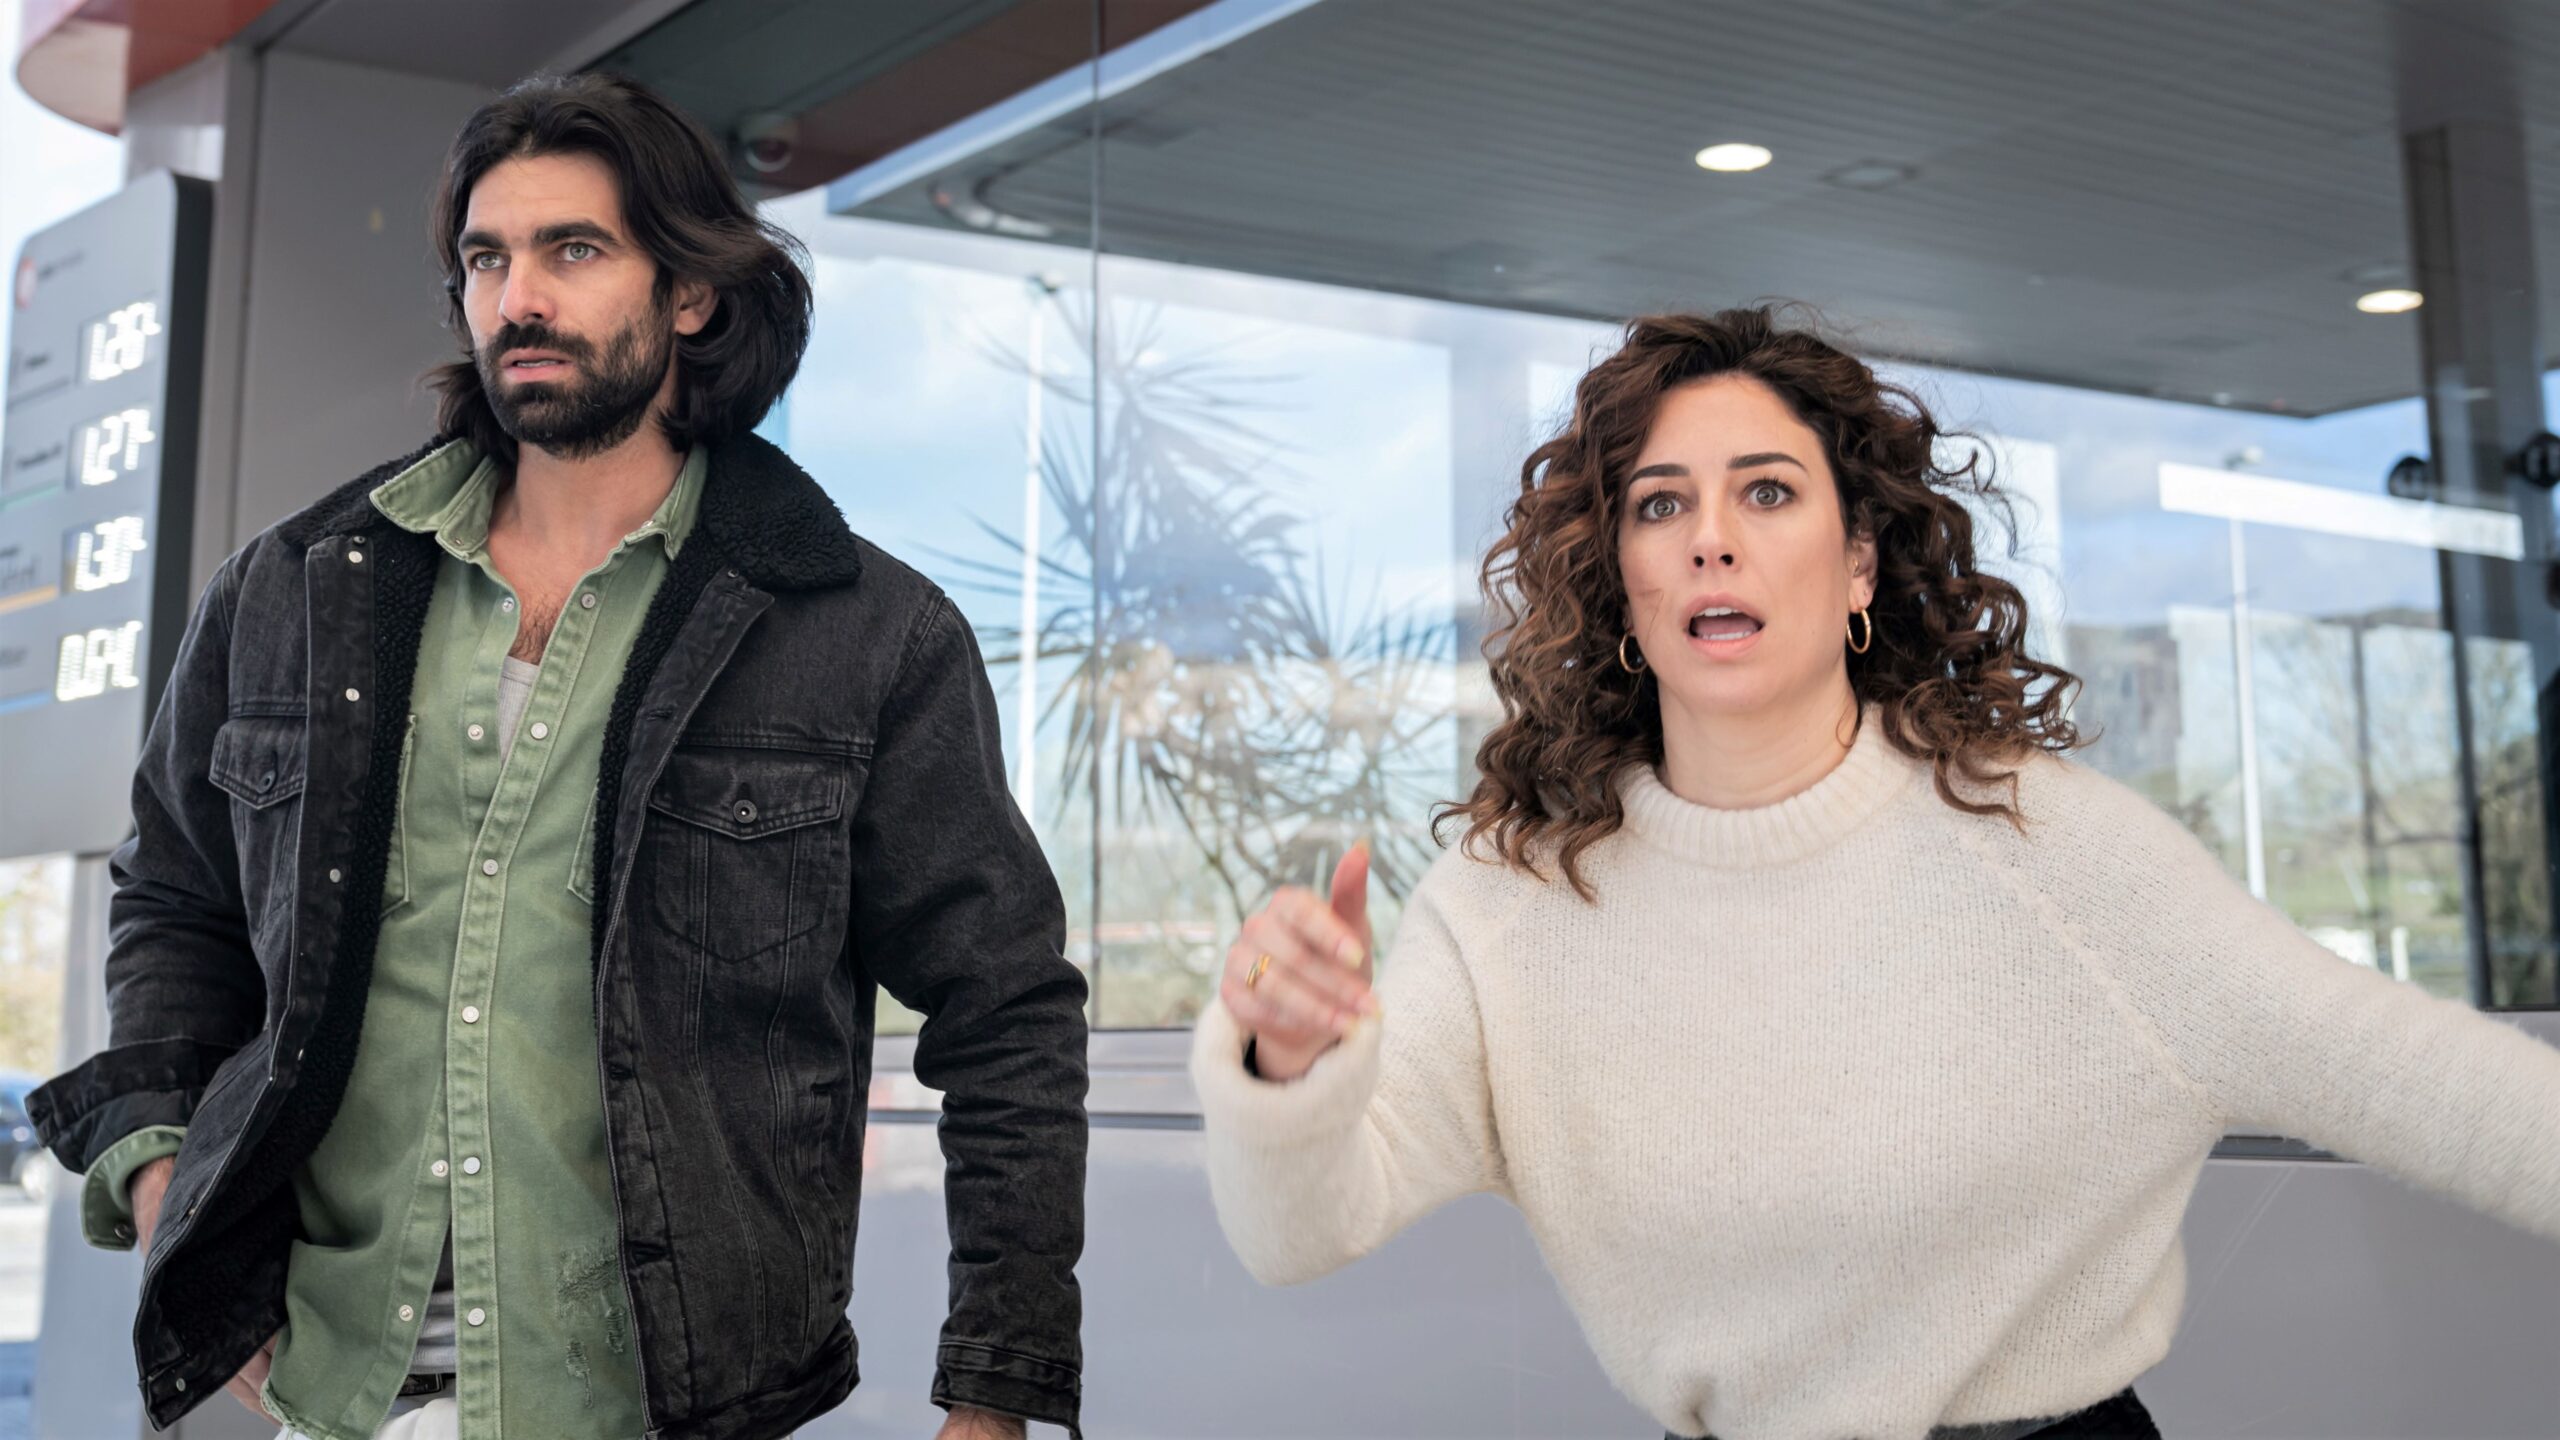 A bearded man and a dark-haired woman looking stressed and anxious outside a building